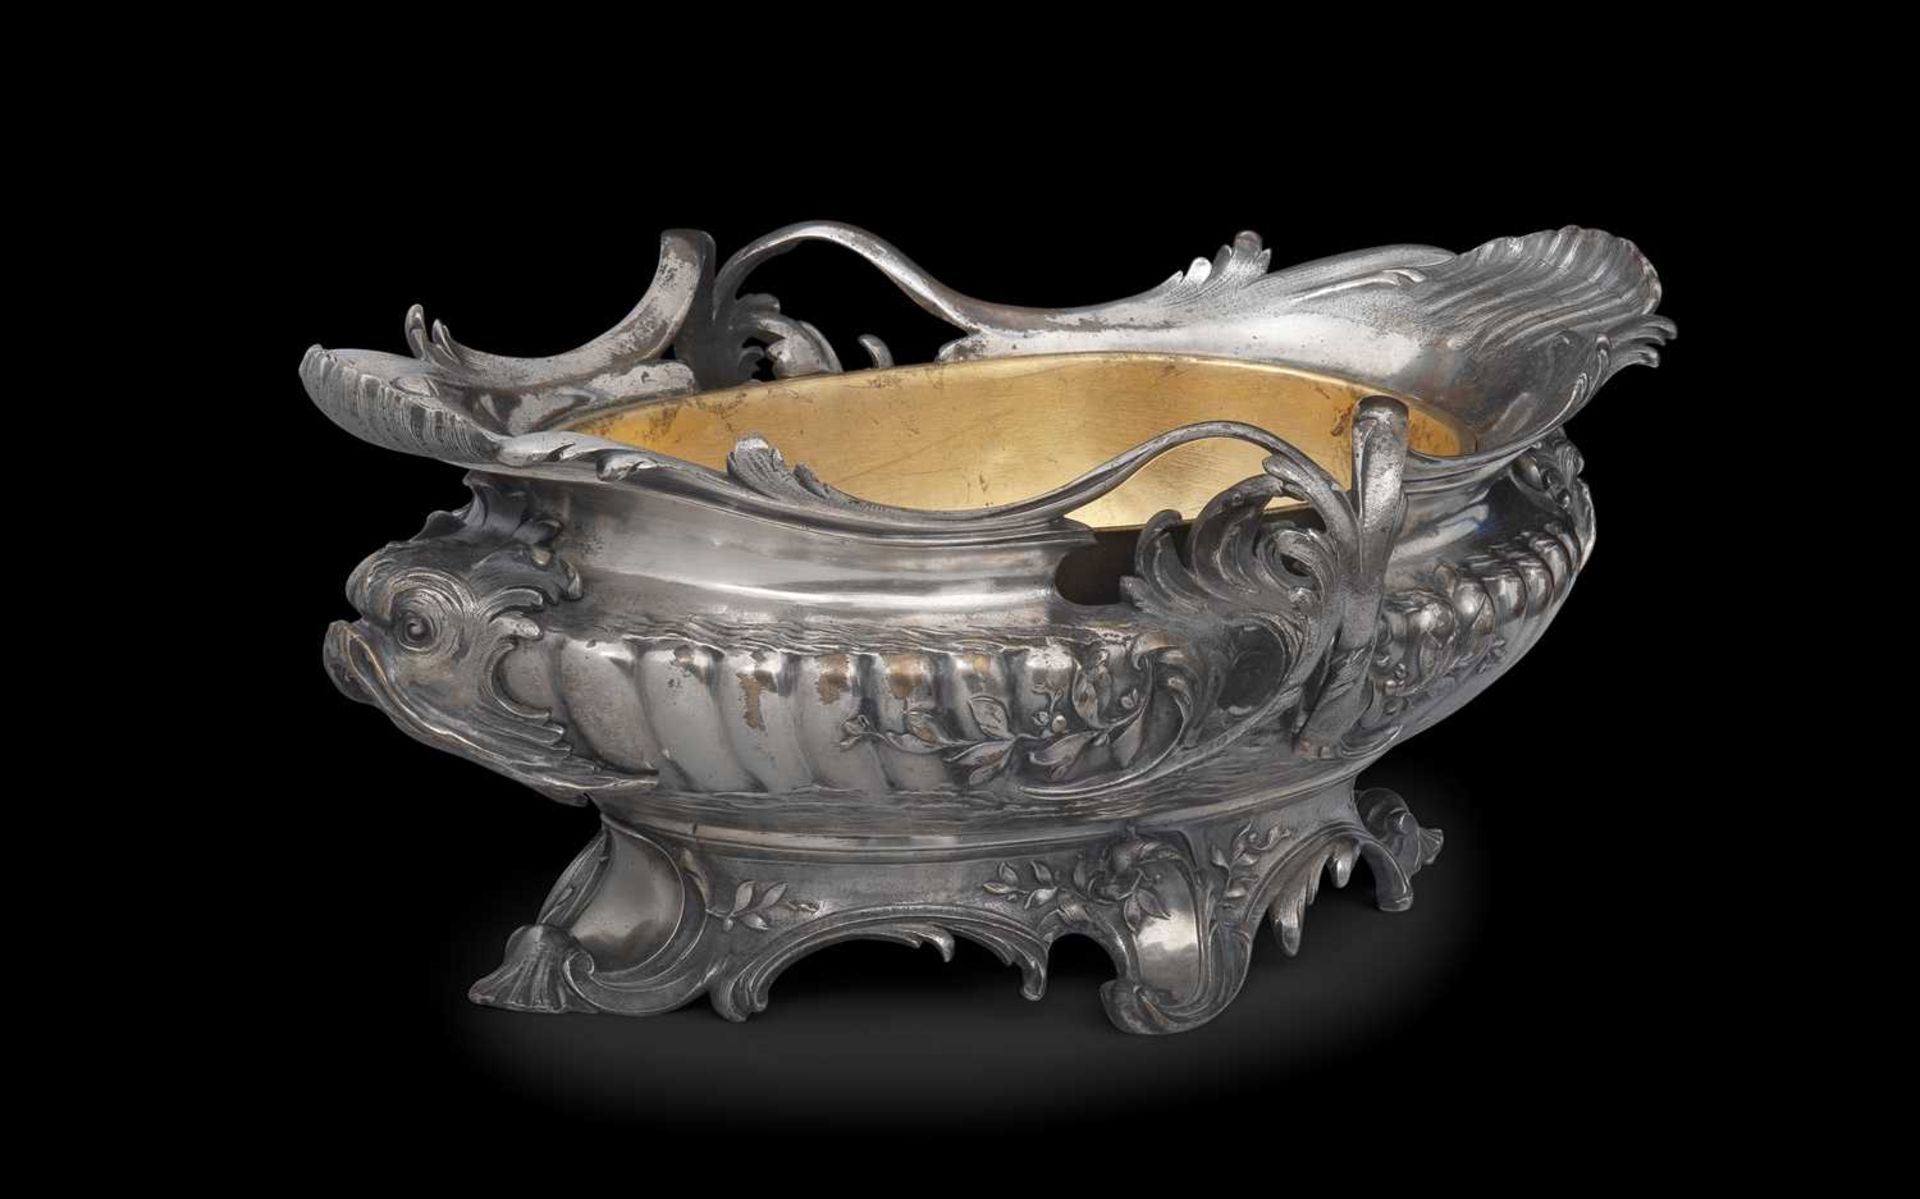 H. LUPPENS & CIE: A LATE 19TH CENTURY SILVERED BRONZE JARDINIERE